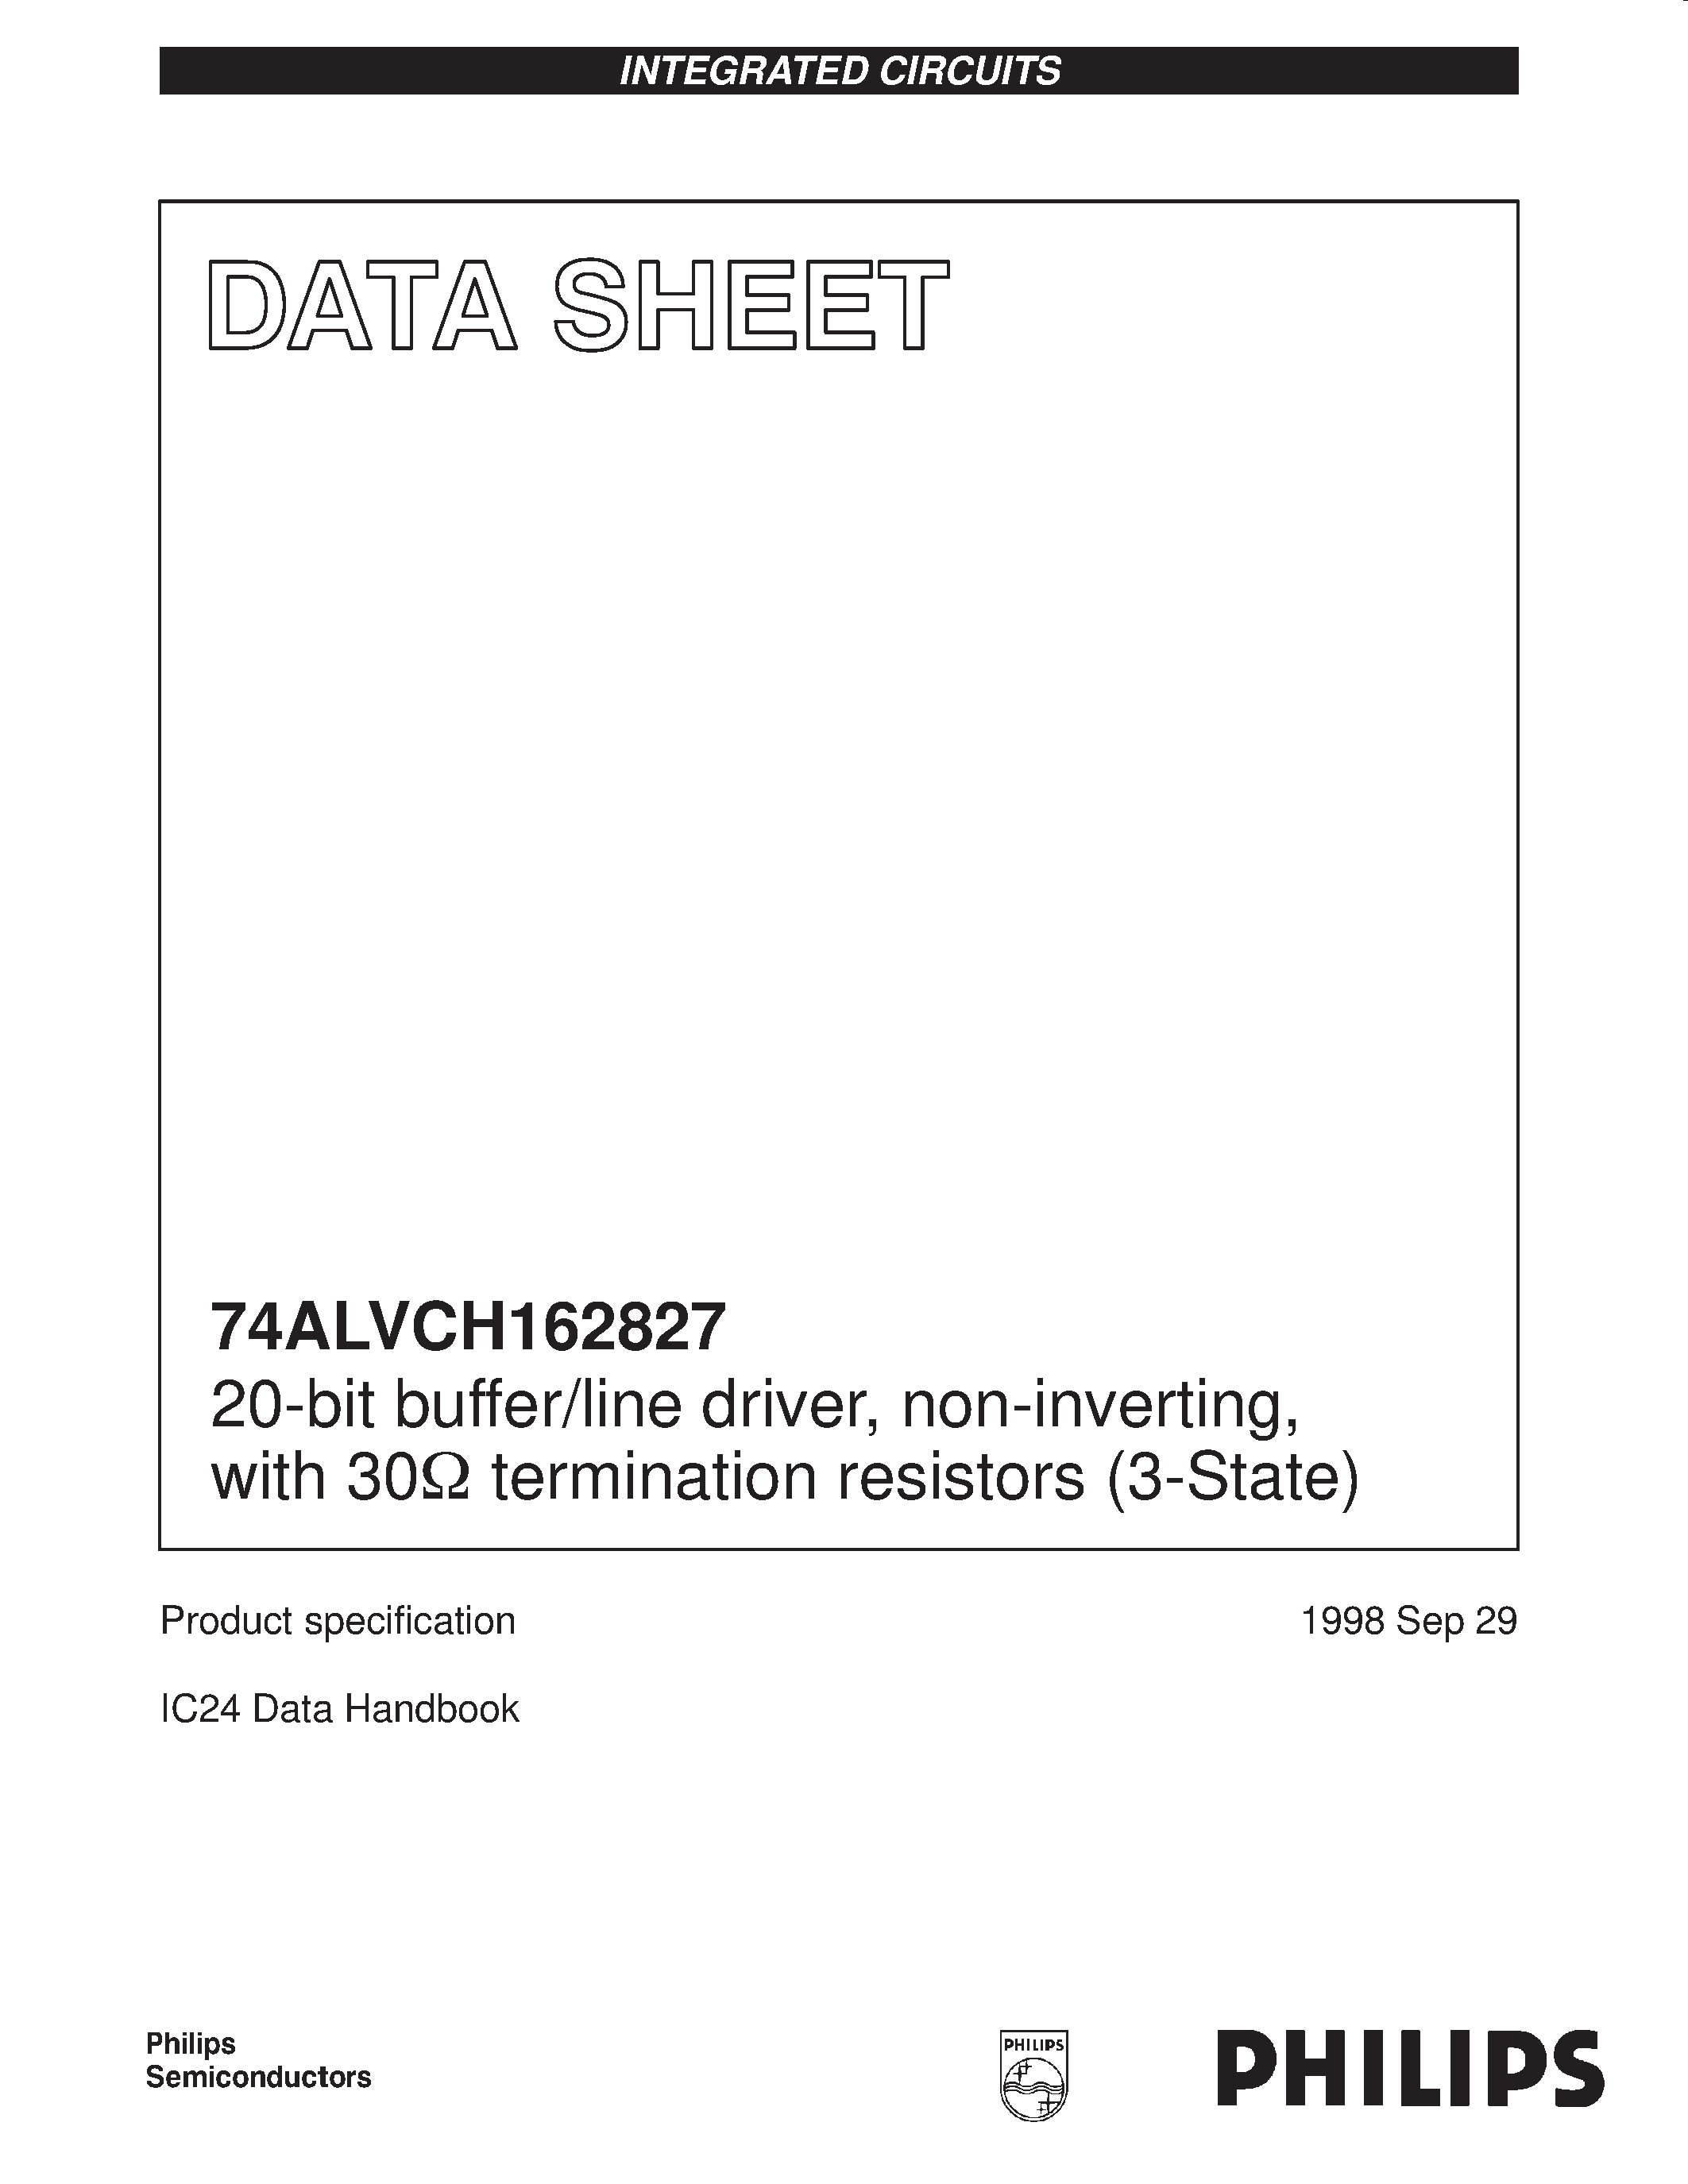 Datasheet 74ALVCH162827DGG - 20-bit buffer/line driver/ non-inverting/with 30ohm termination resistors (3-State) page 1